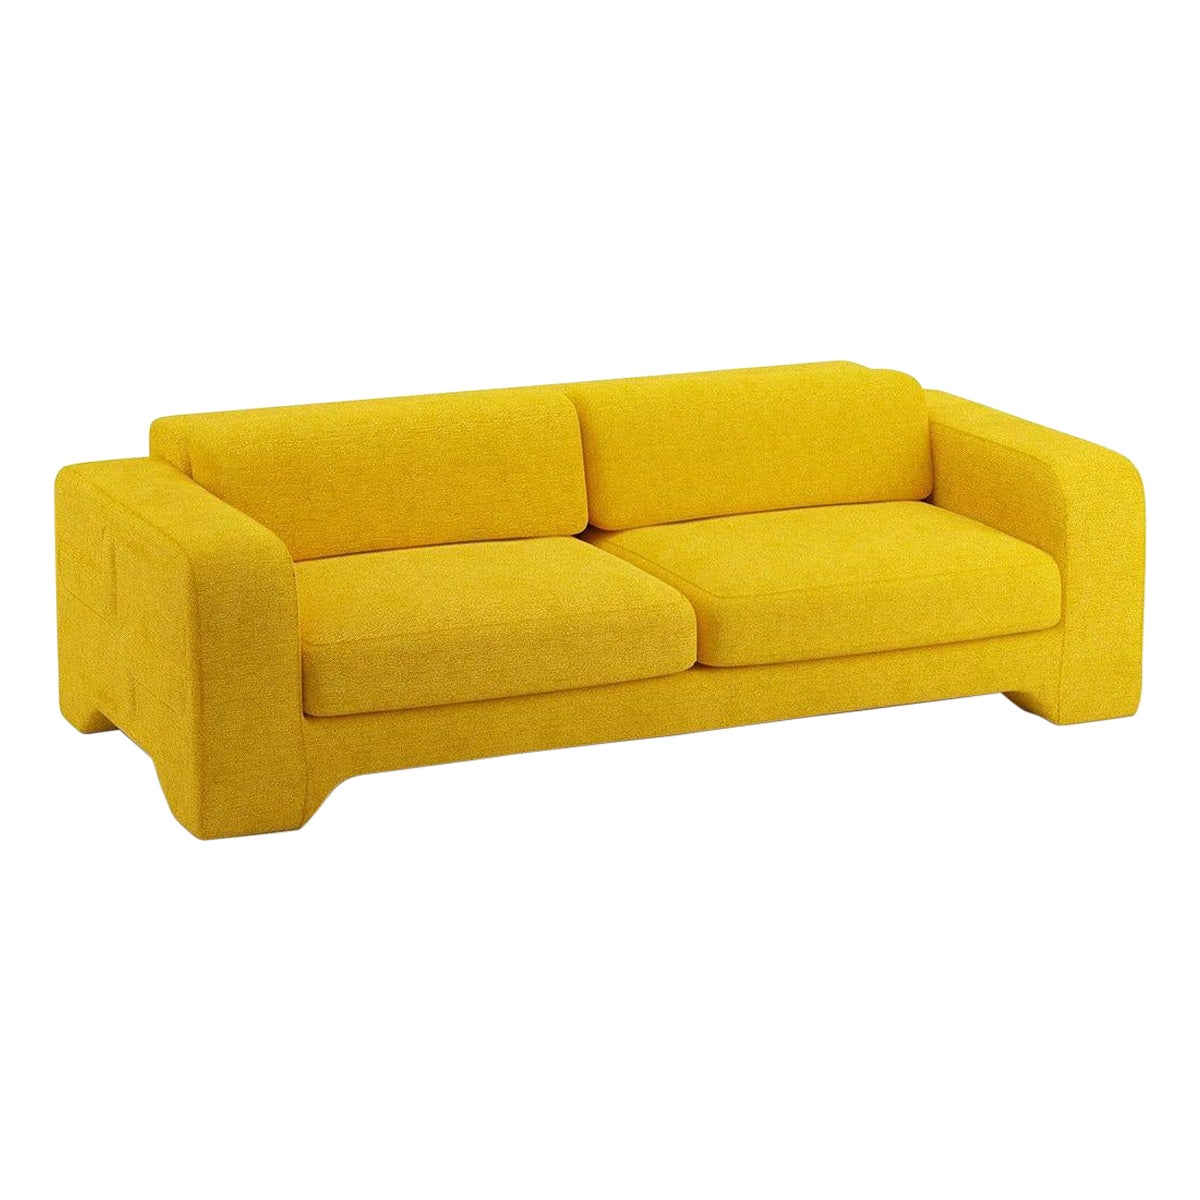 Popus Editions Giovanna 4 Seater Sofa in Corn Megeve Fabric with a Knit Effect